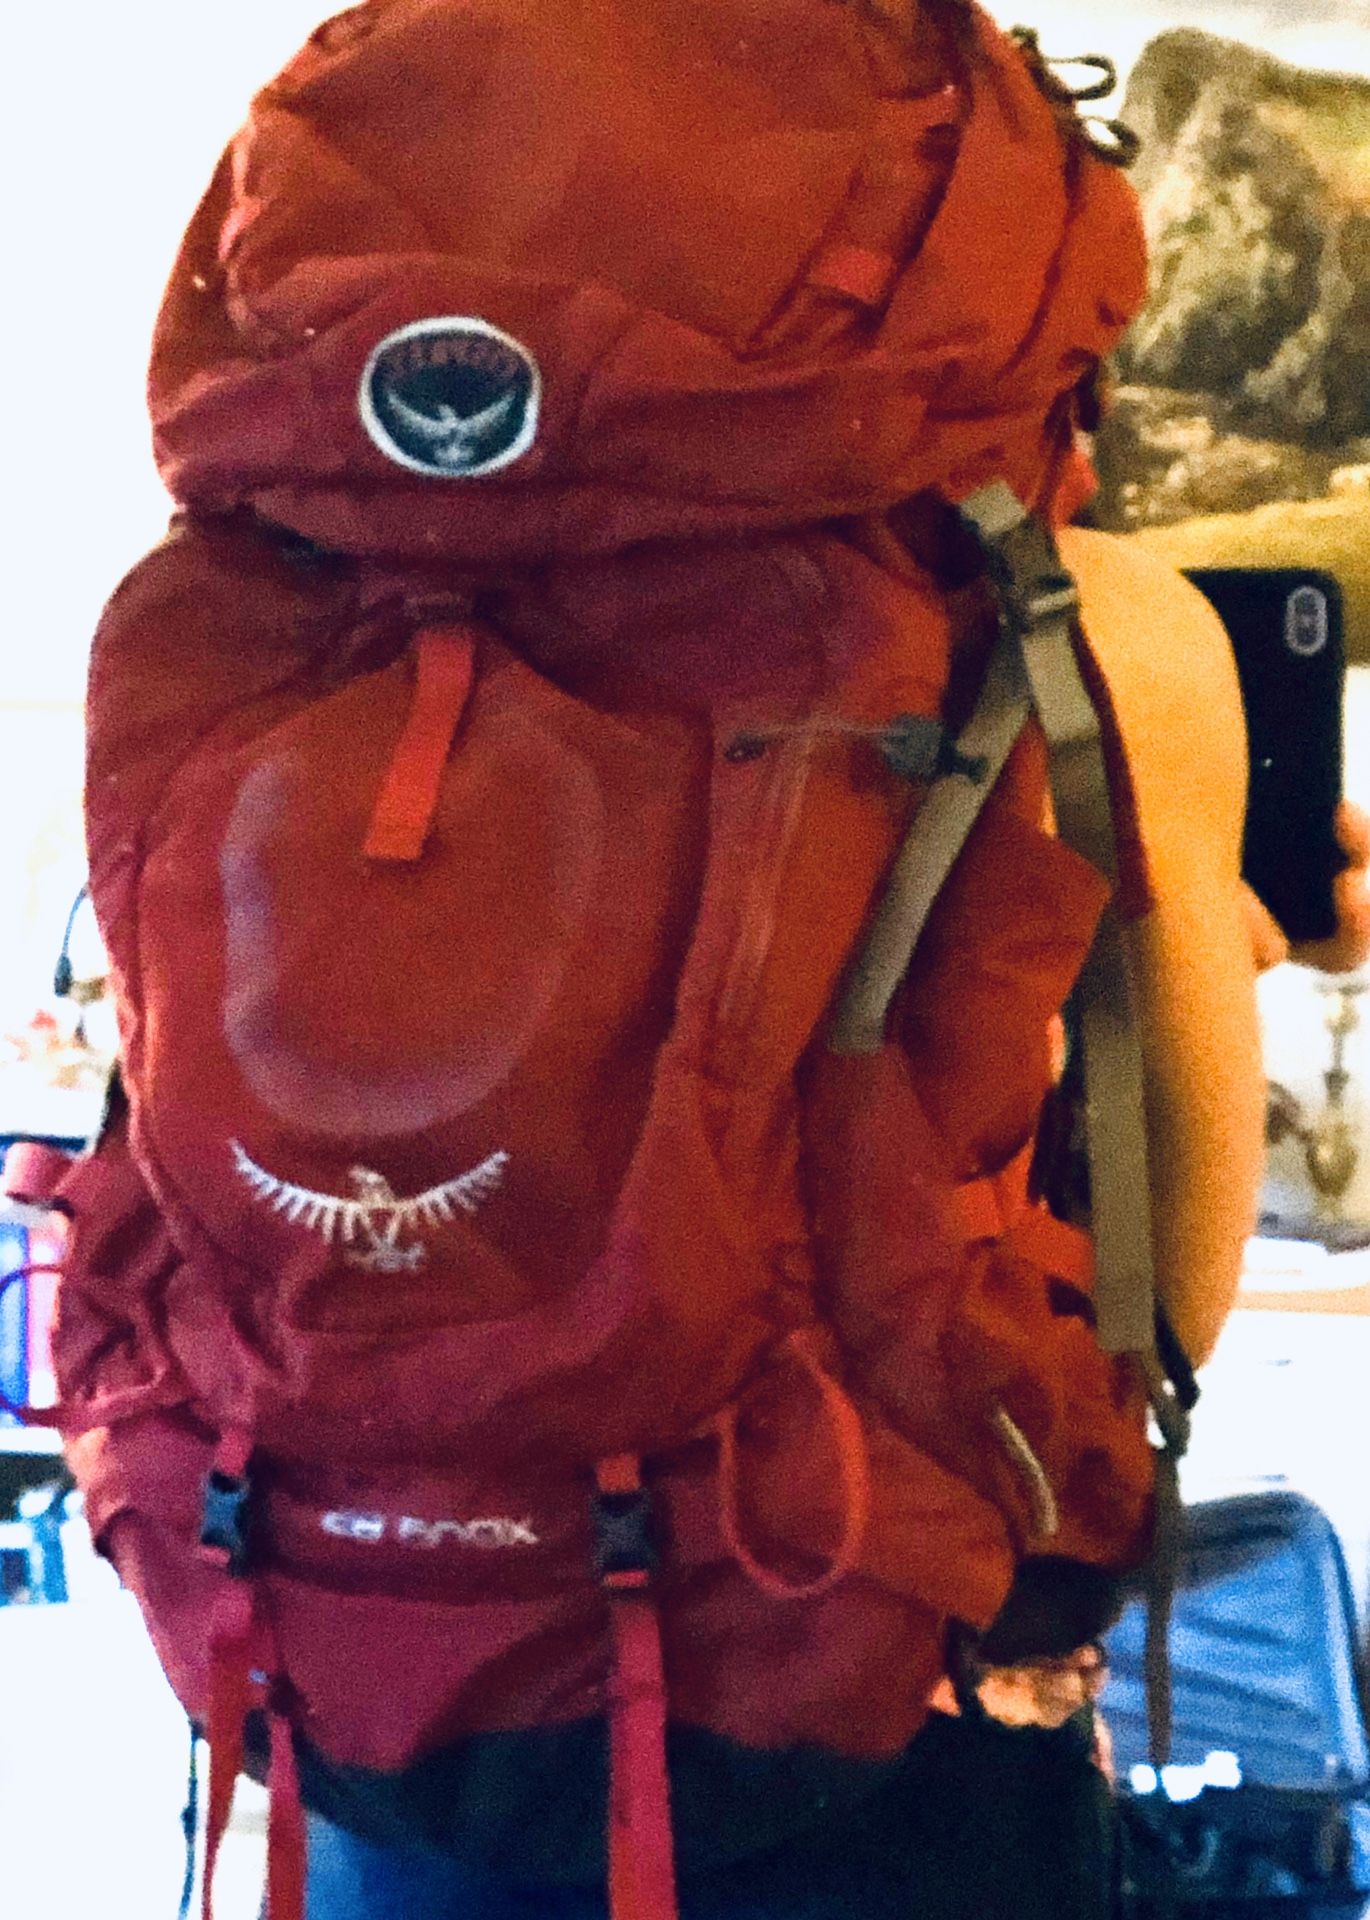 Osprey Xena 85 pack with Airporter bag ($450 value)